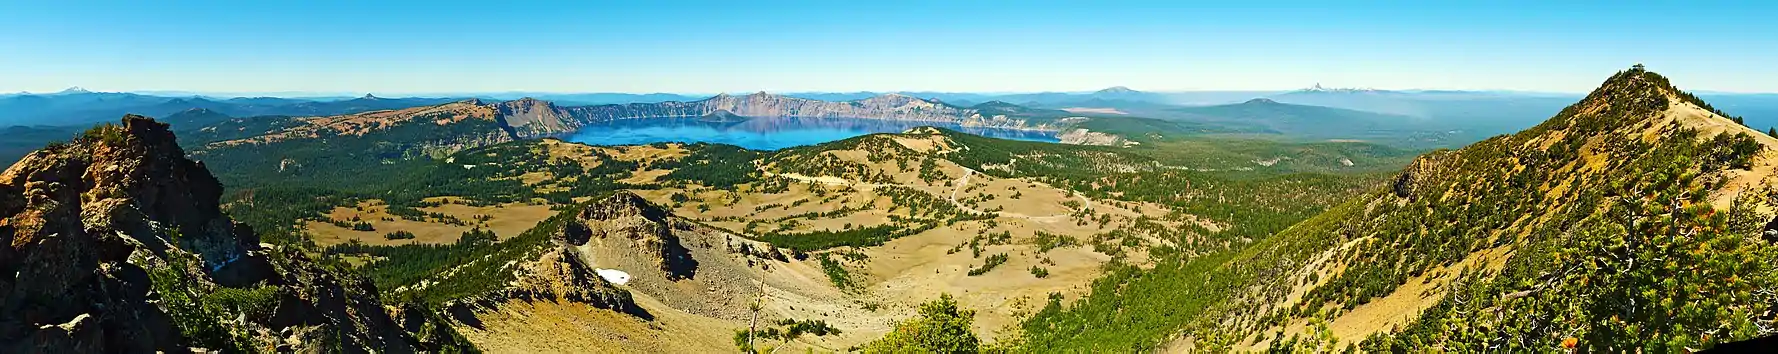 A panorama shot displays Crater Lake in the center background, with mountains in the foreground on the left and right